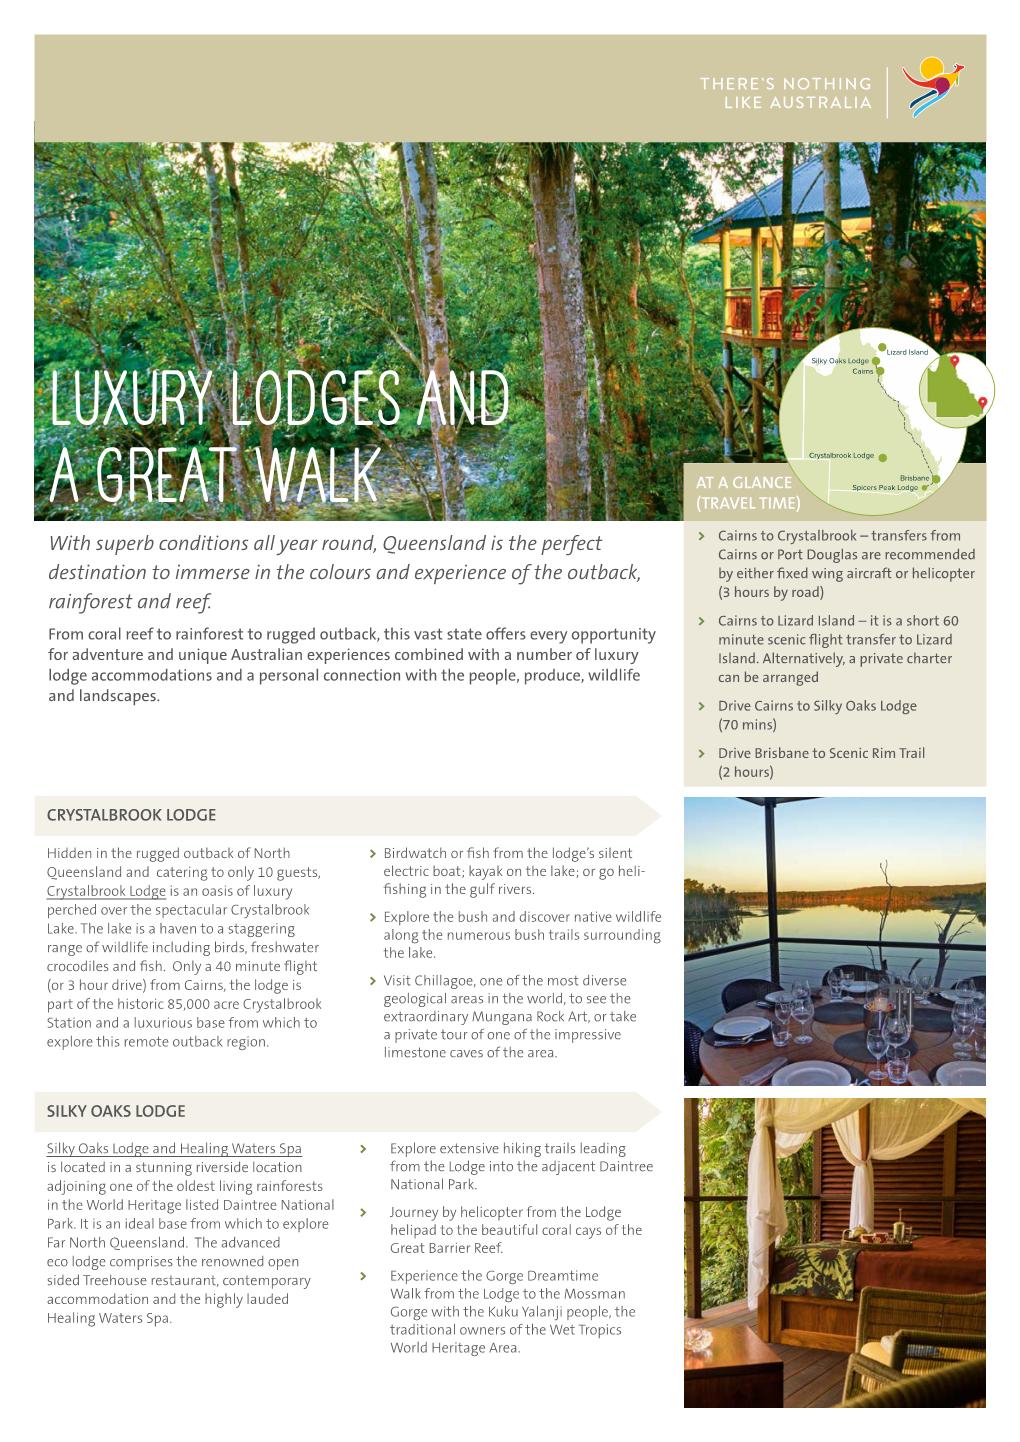 Luxury Lodges and a Great Walk with Superb